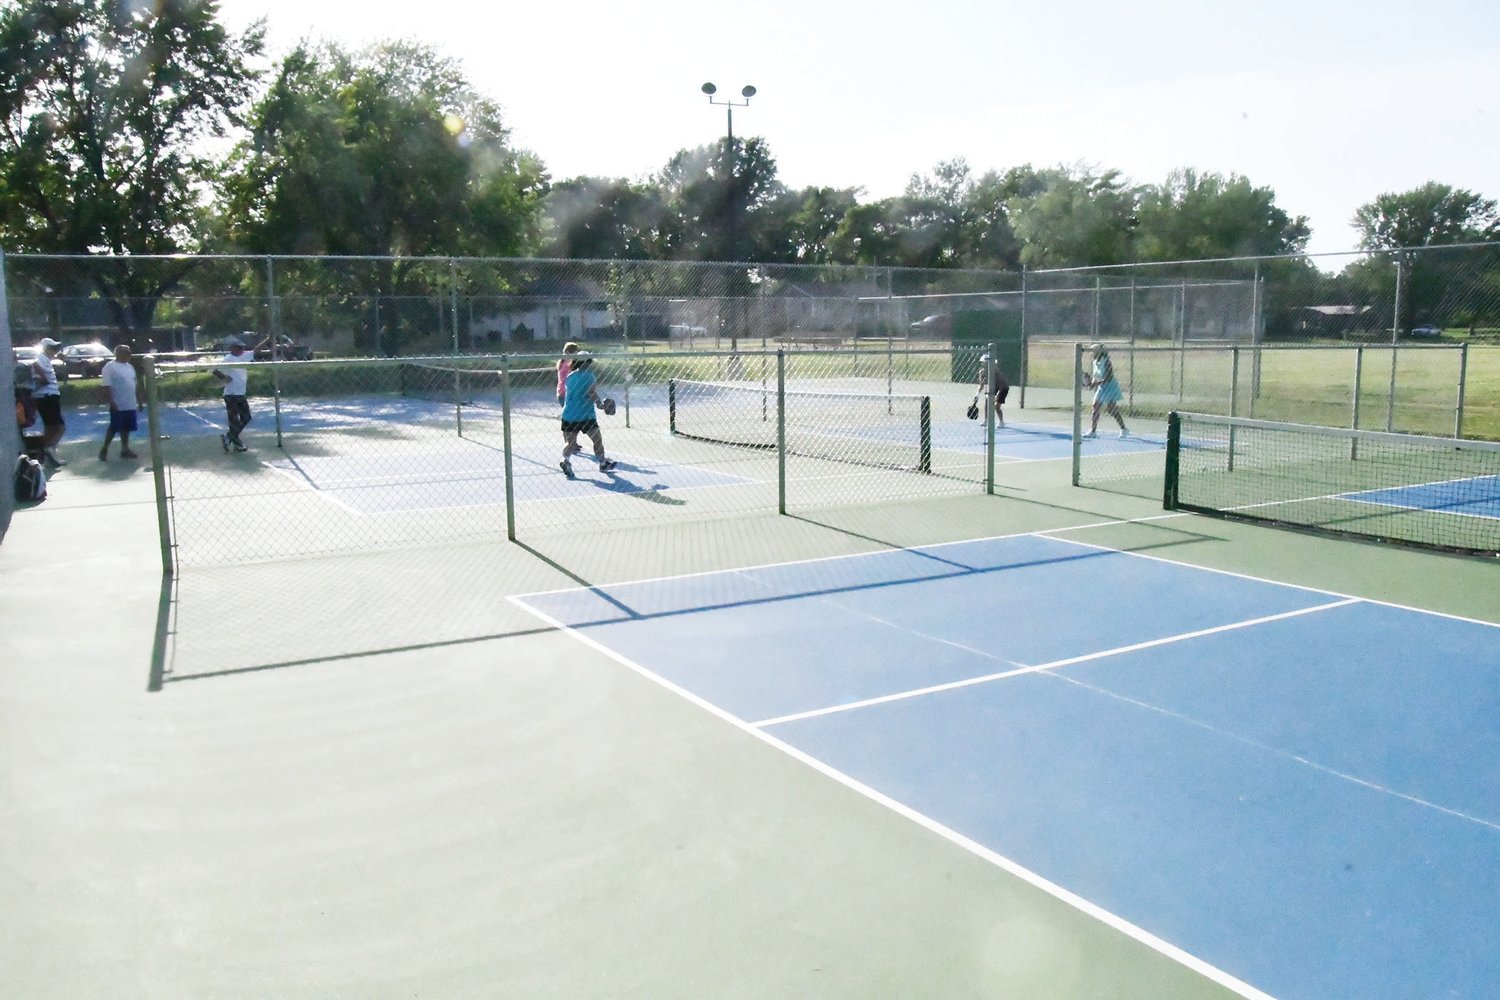 The city of Moberly in 2019, after passage of a dedicated sales tax, installed two pickleball-only courts in Fox Park.